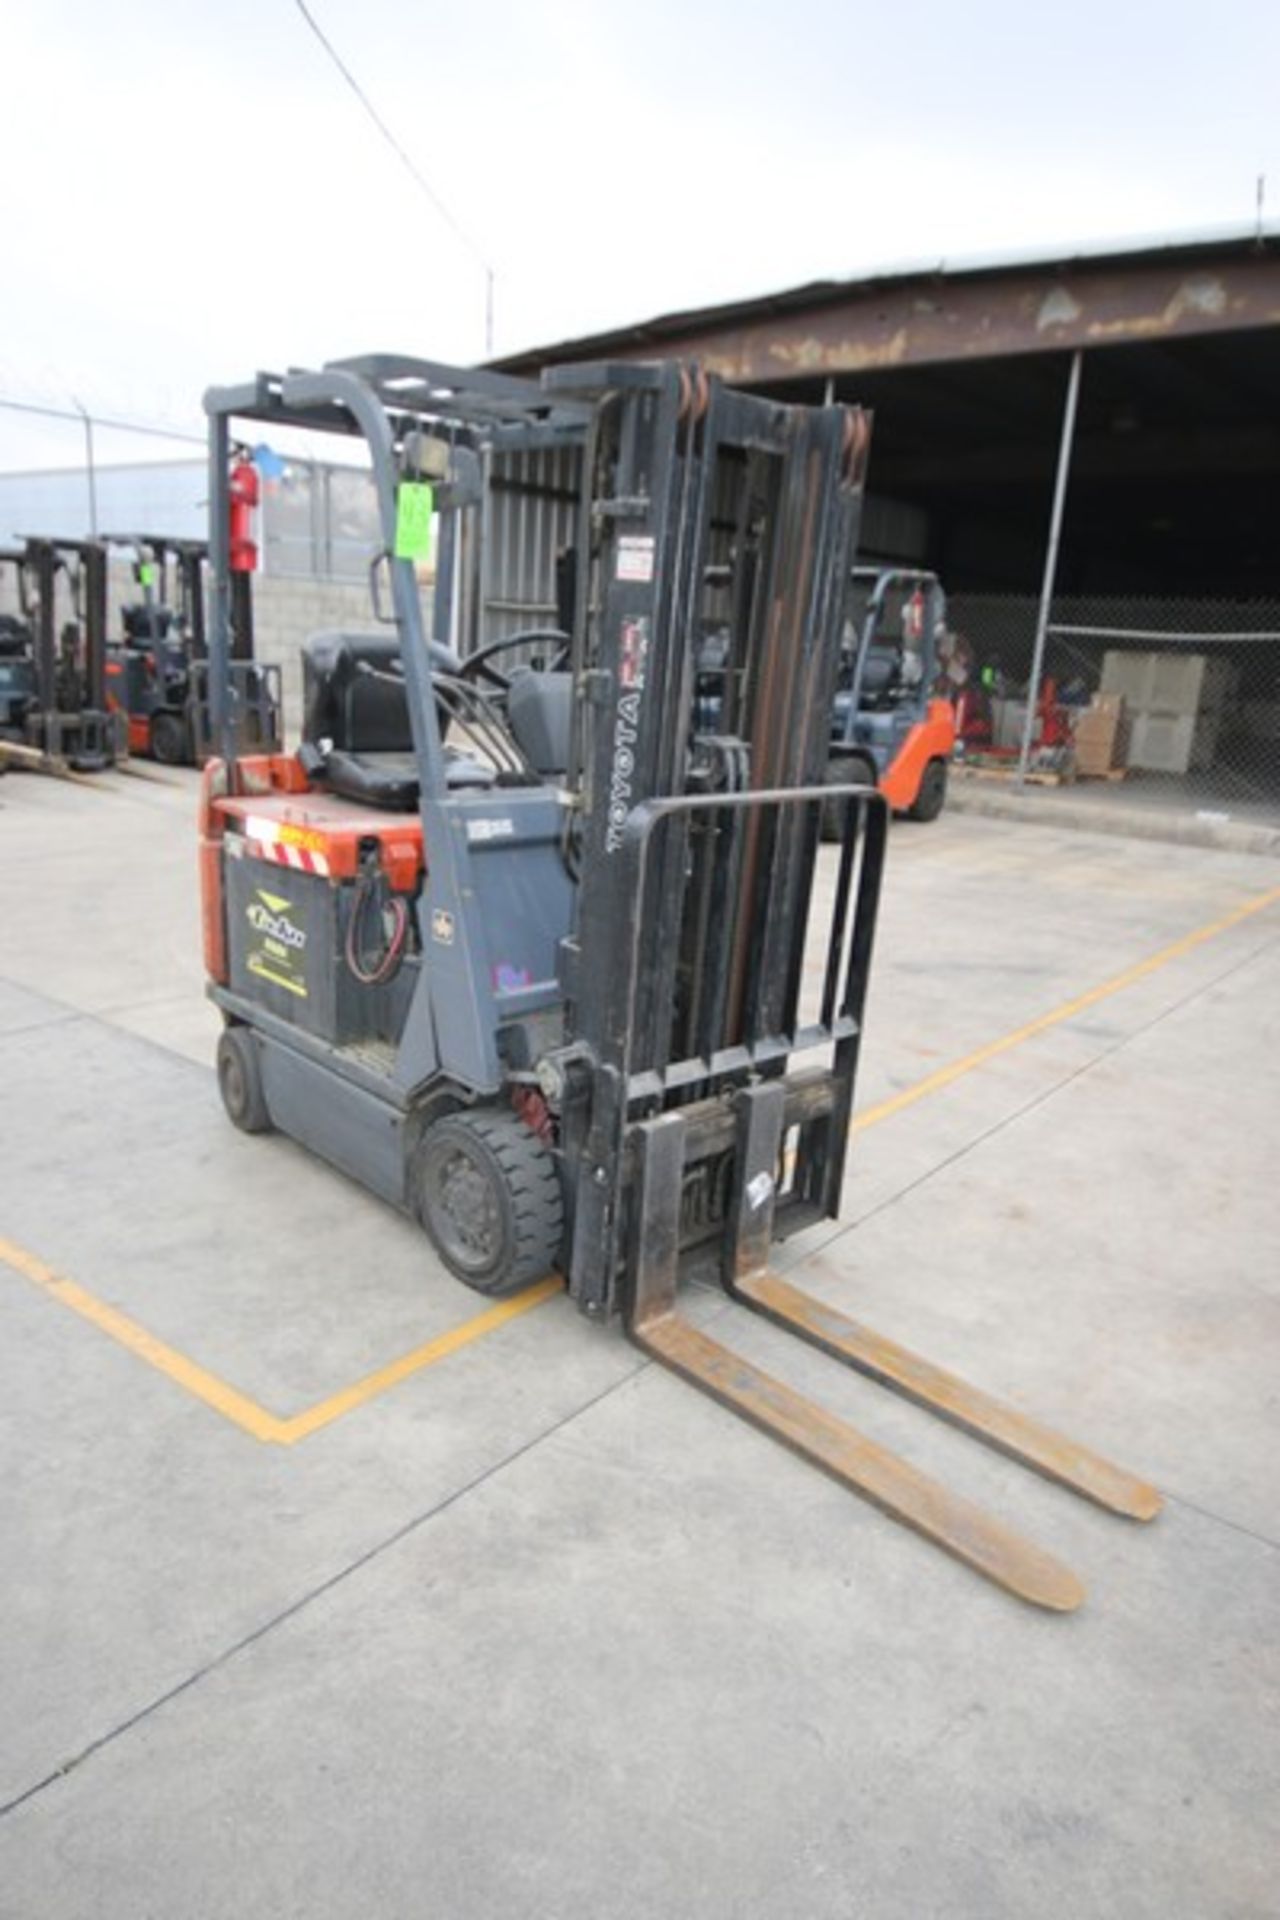 Toyota 2,600 lb. Sit-Down Electric Forklift, M/N 7FBCU15, S/N 60271, with 36 Volt Battery, with